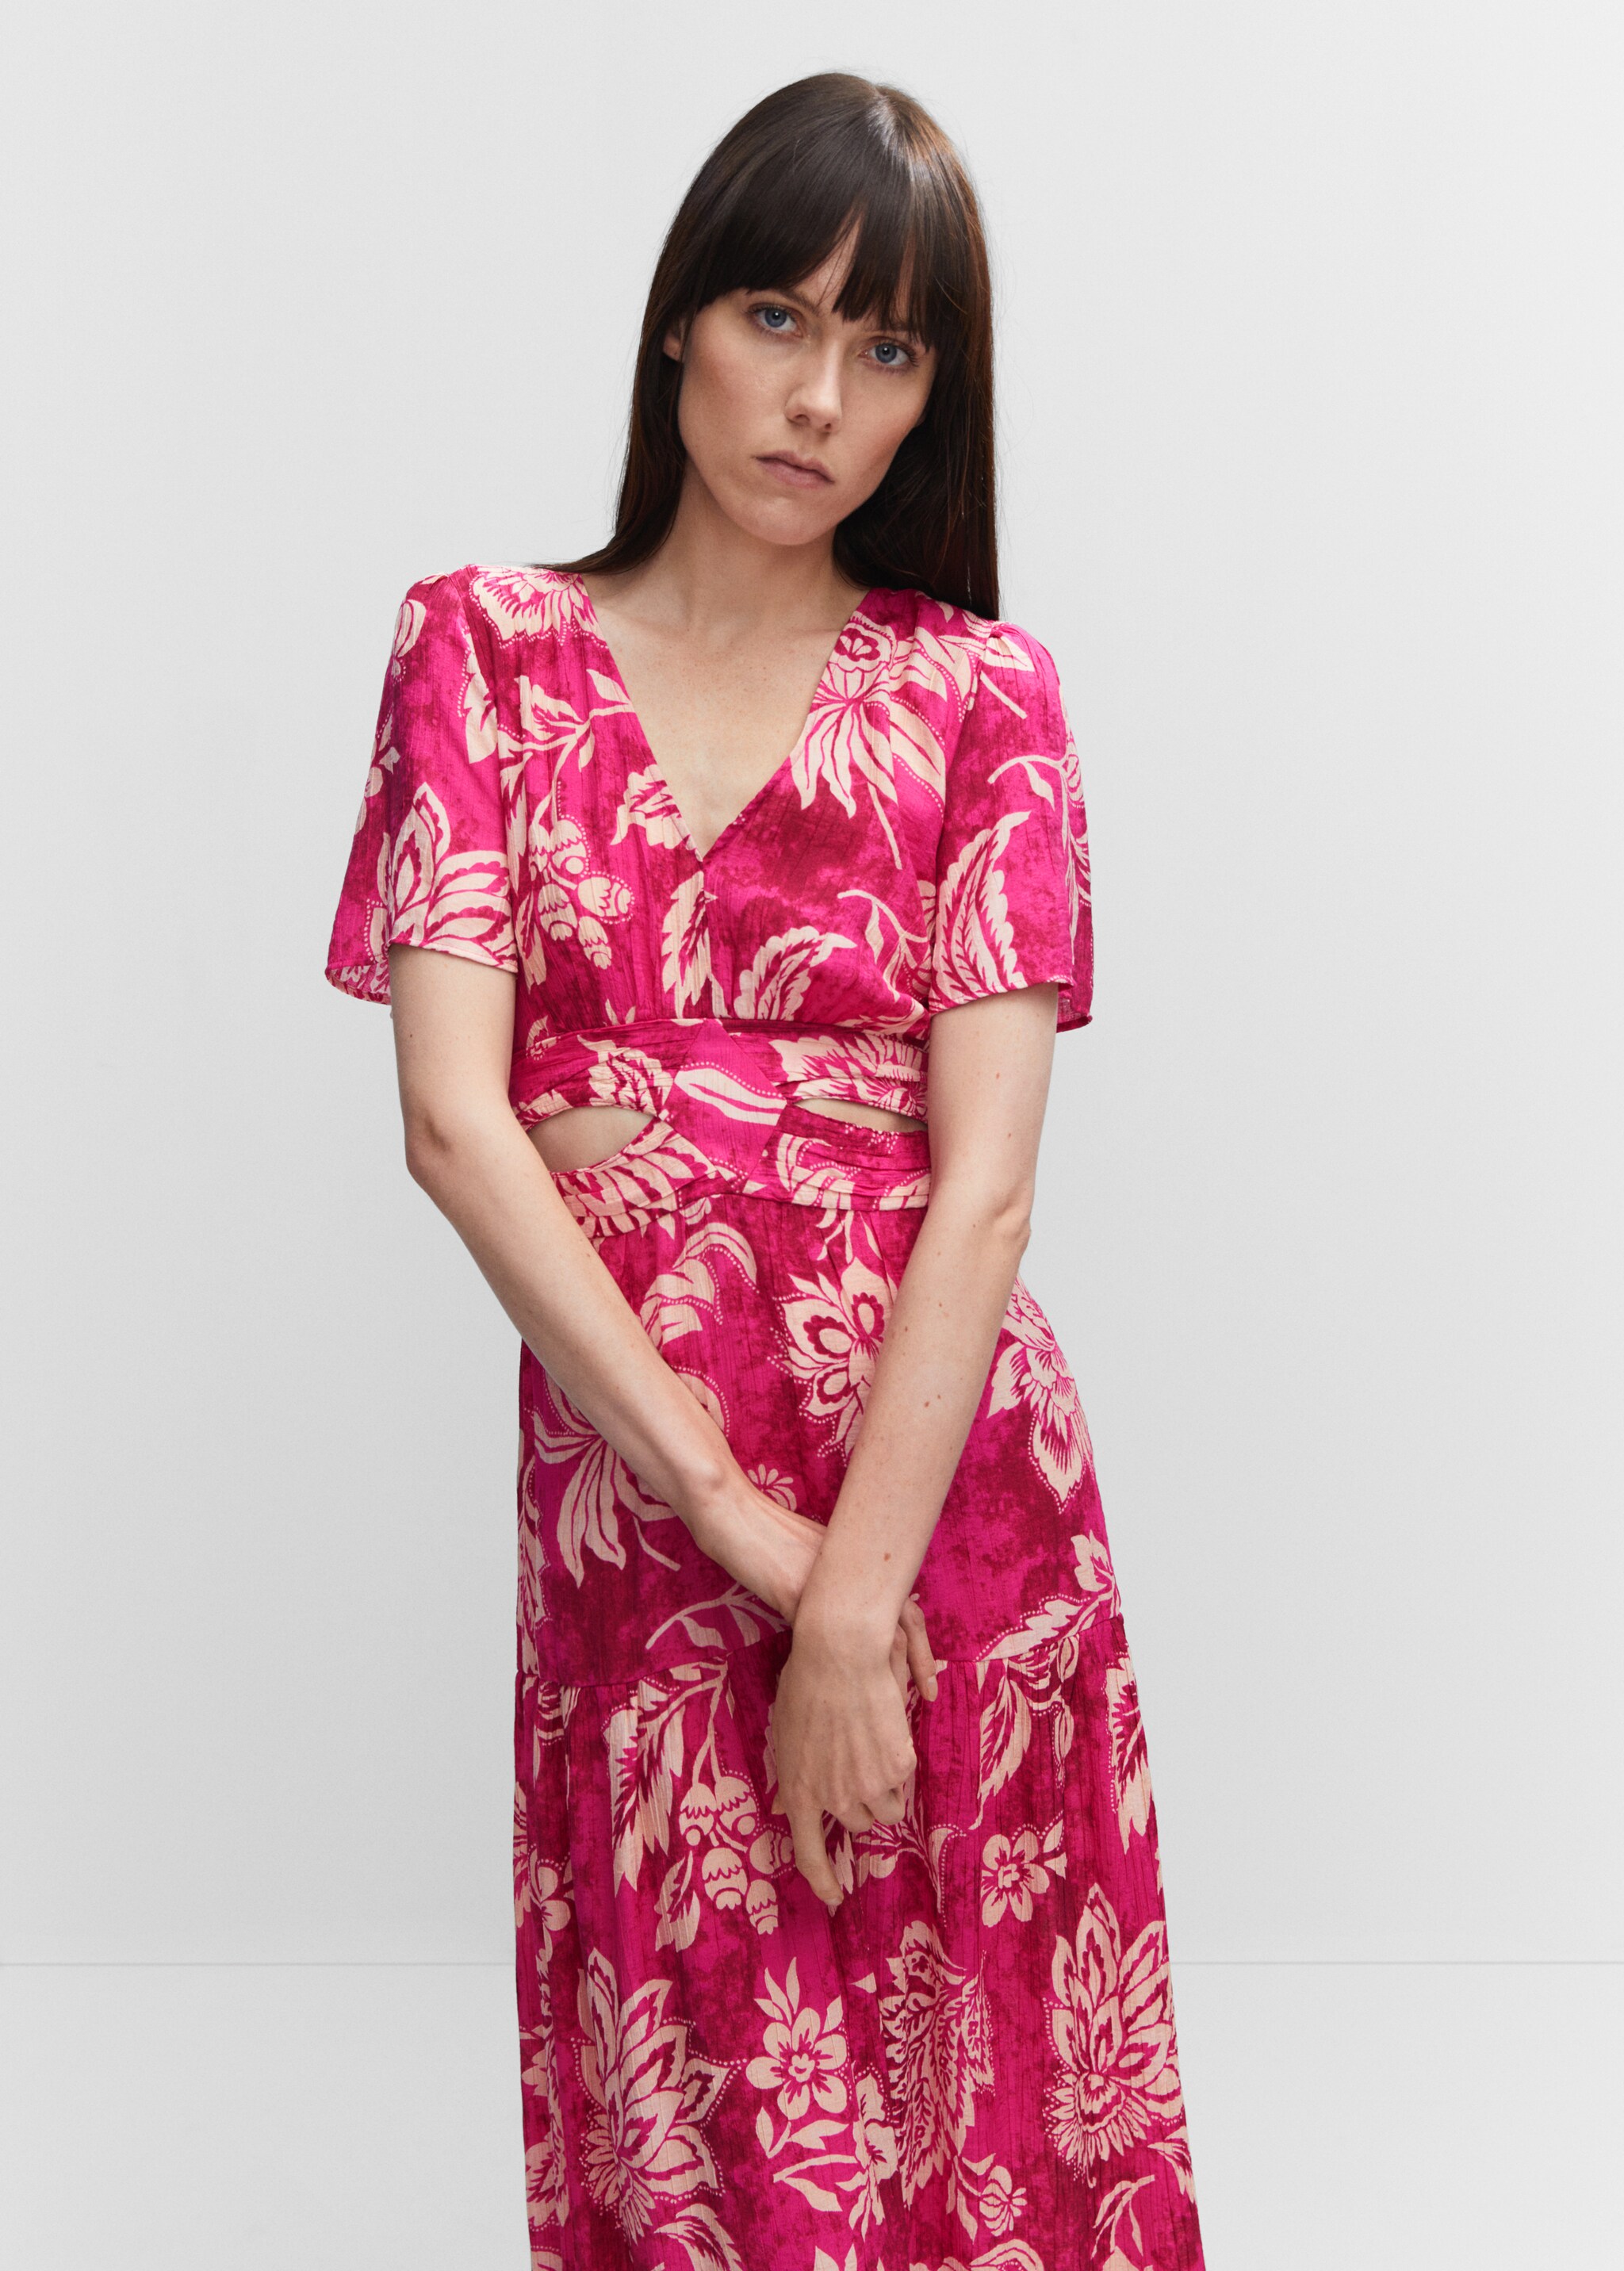 Floral dress with cut-out  - Medium plane